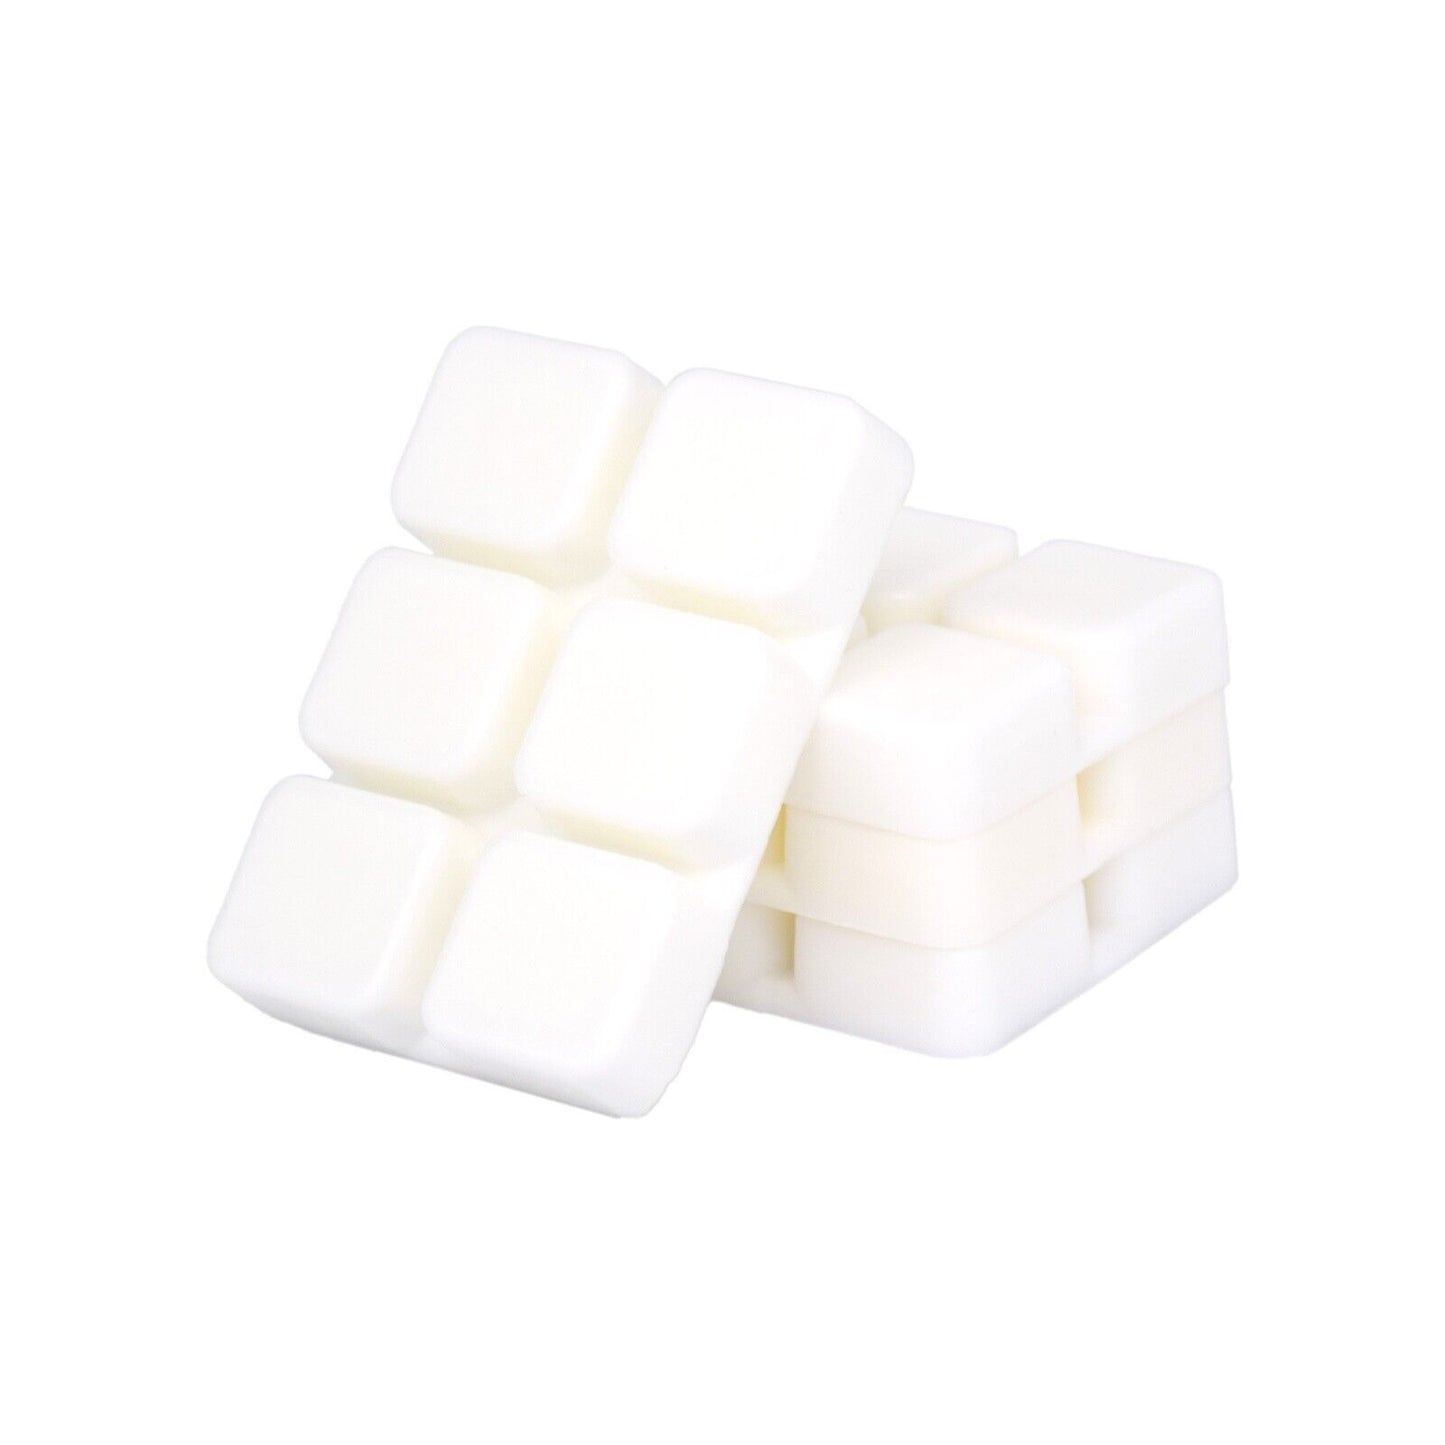 4x Wax Melts Highly Scented Soy Snap Bars Essential Oil Premium 4x6 = 24 cubes